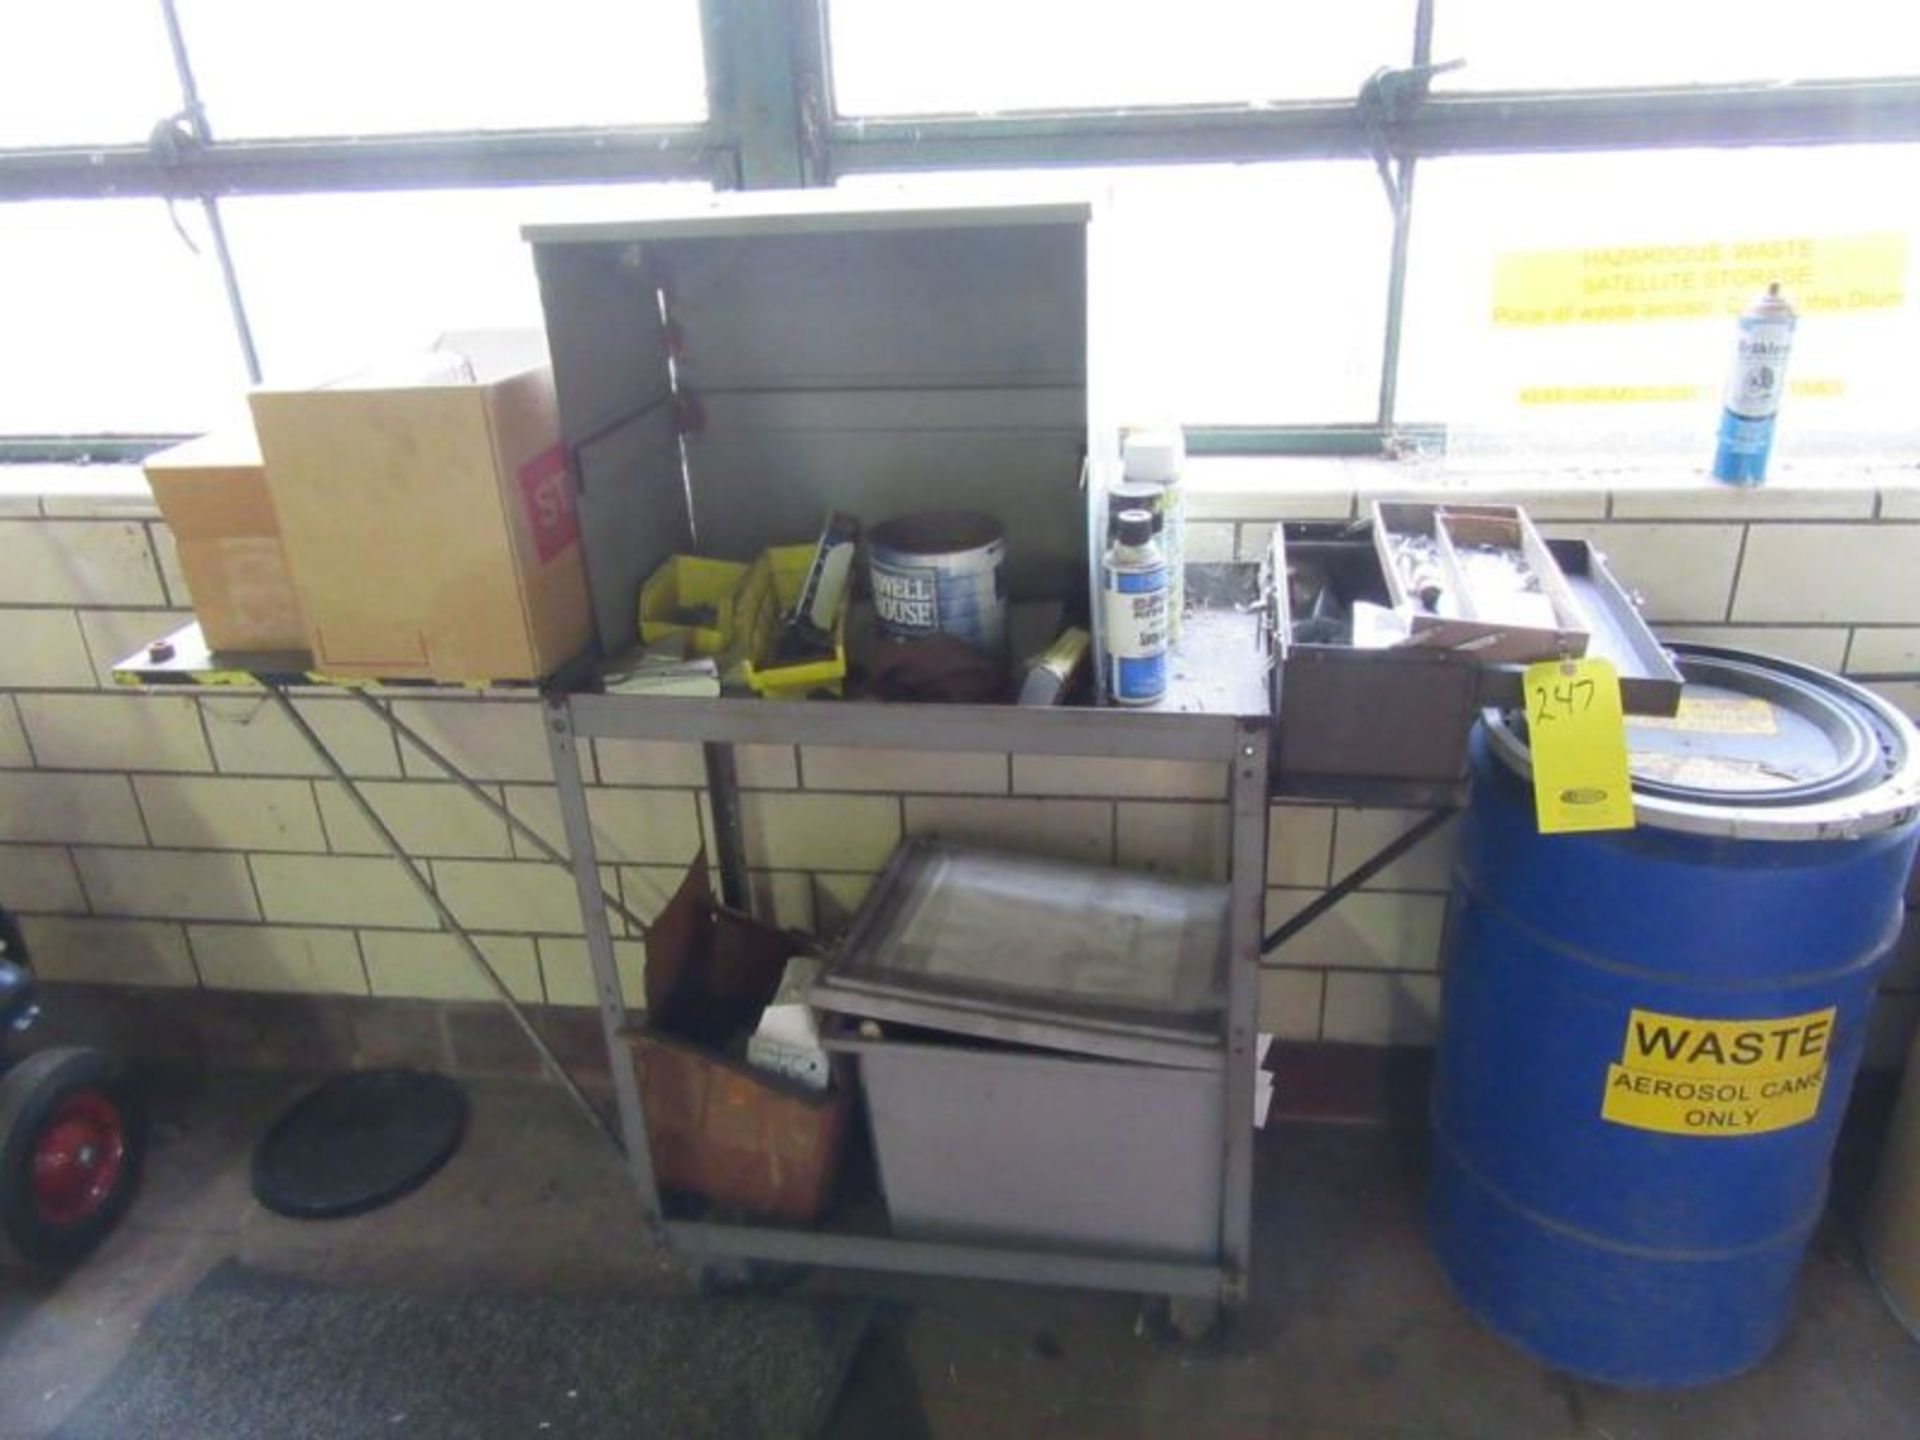 METAL TABLE, SHELF, STRAPPING TOOLS AND CONTENTS